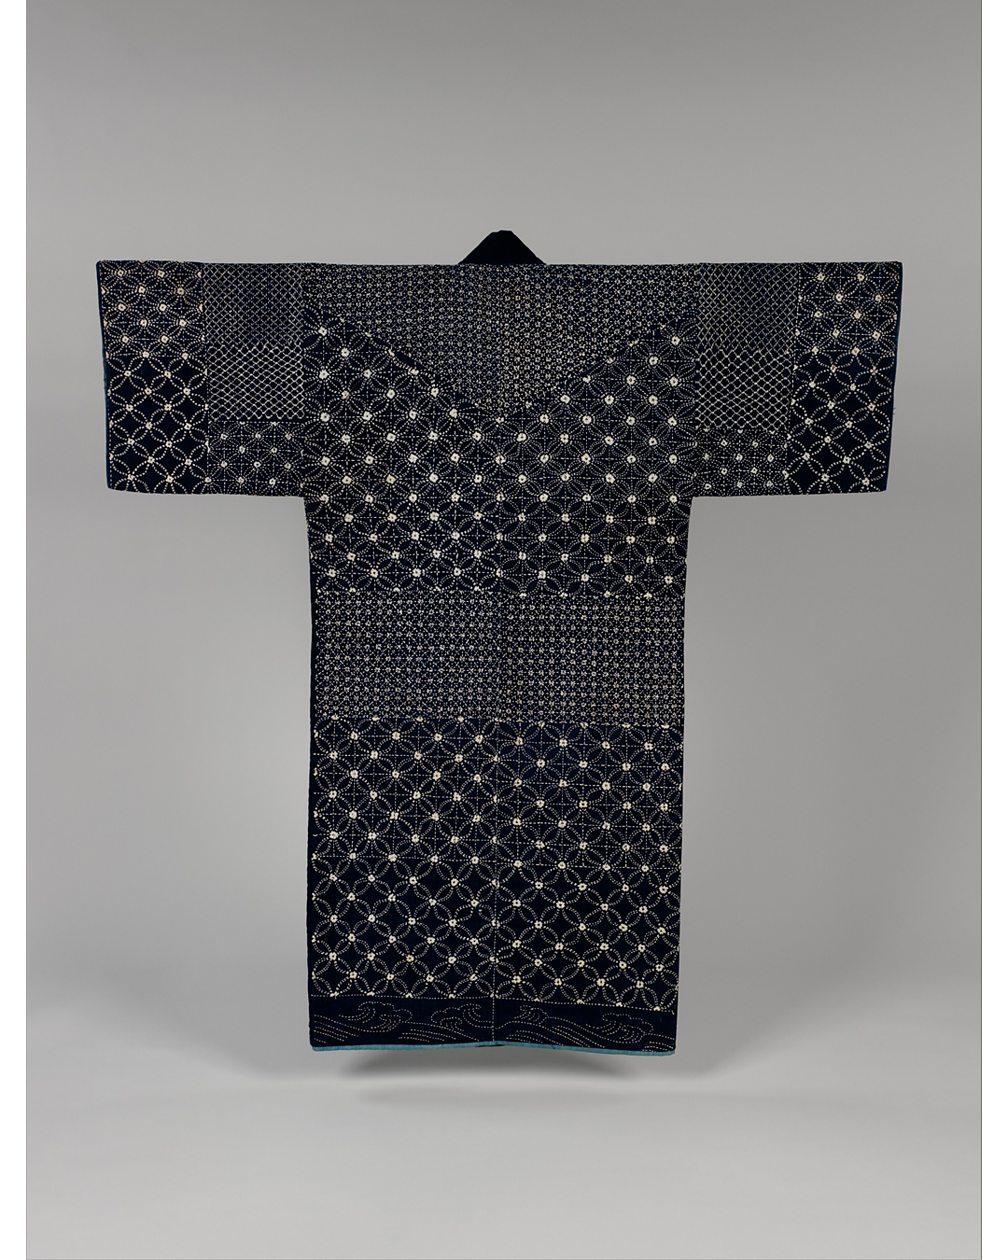 Metropolitan Museum of Art A fisherman's jacket – or donza – created in the Meji Period is a stunning example of sashiko craftsmanship (Credit: Metropolitan Museum of Art)